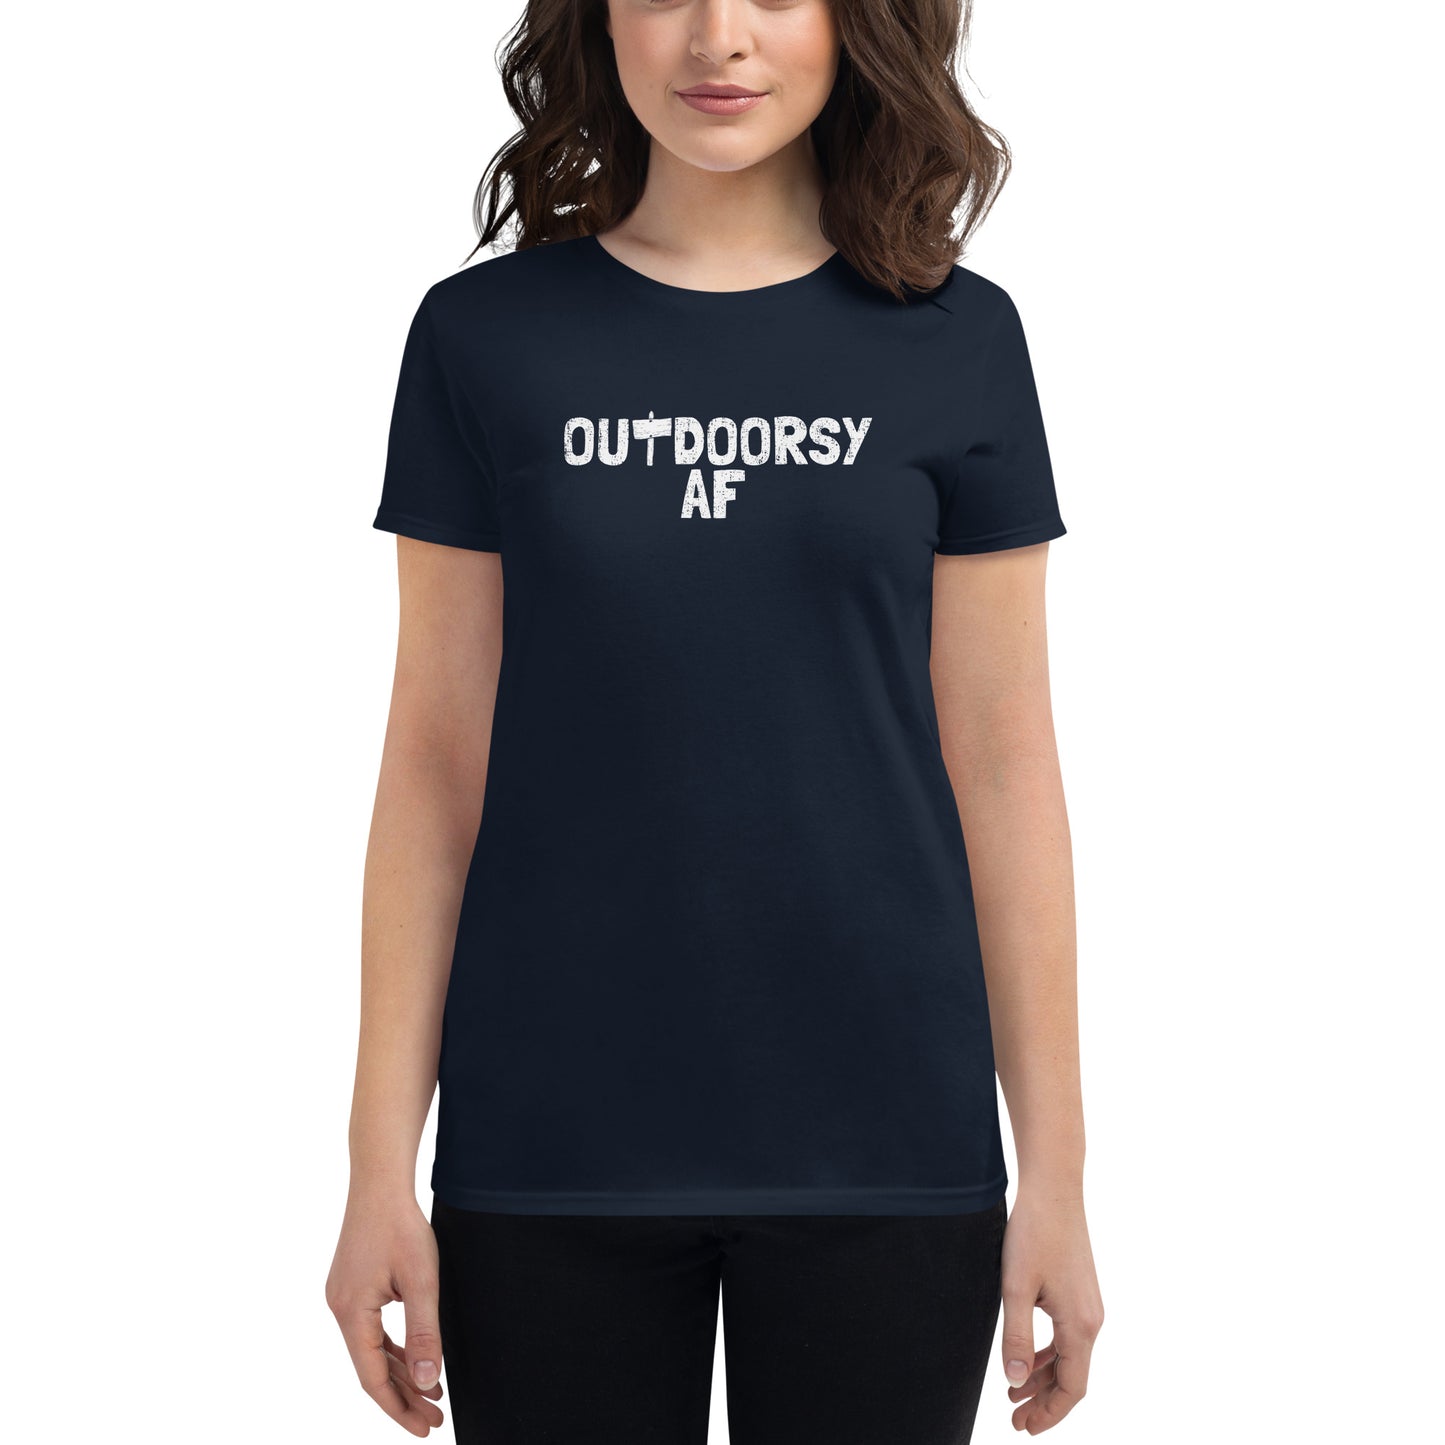 Women's Fashion Fit T-shirt - Outdoorsy AF